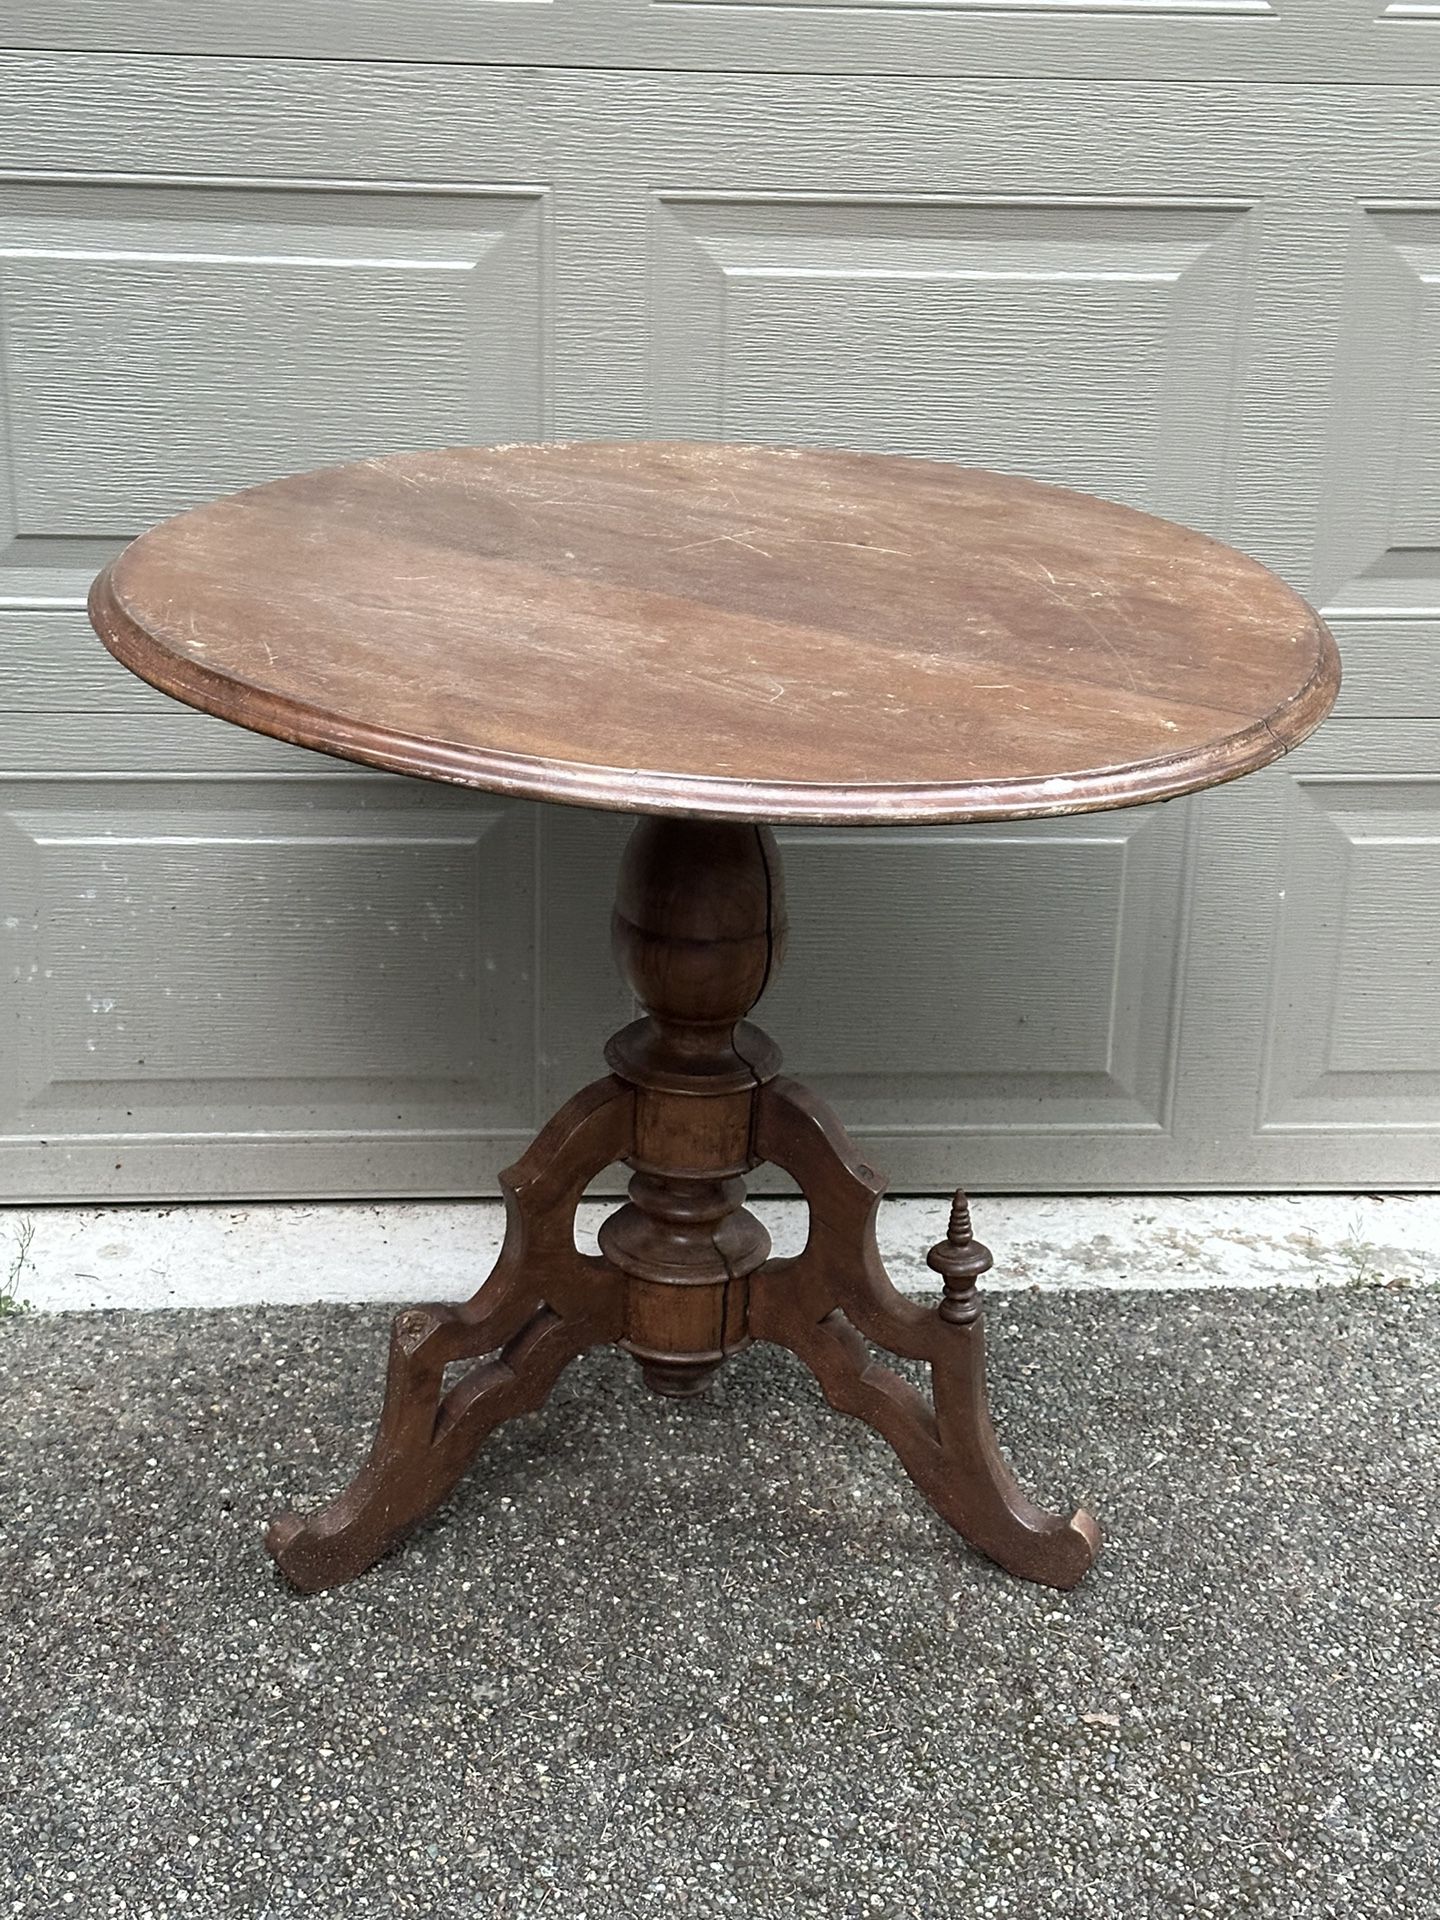 Antique Round Victorian Foyer or Hall Table about 33” wide